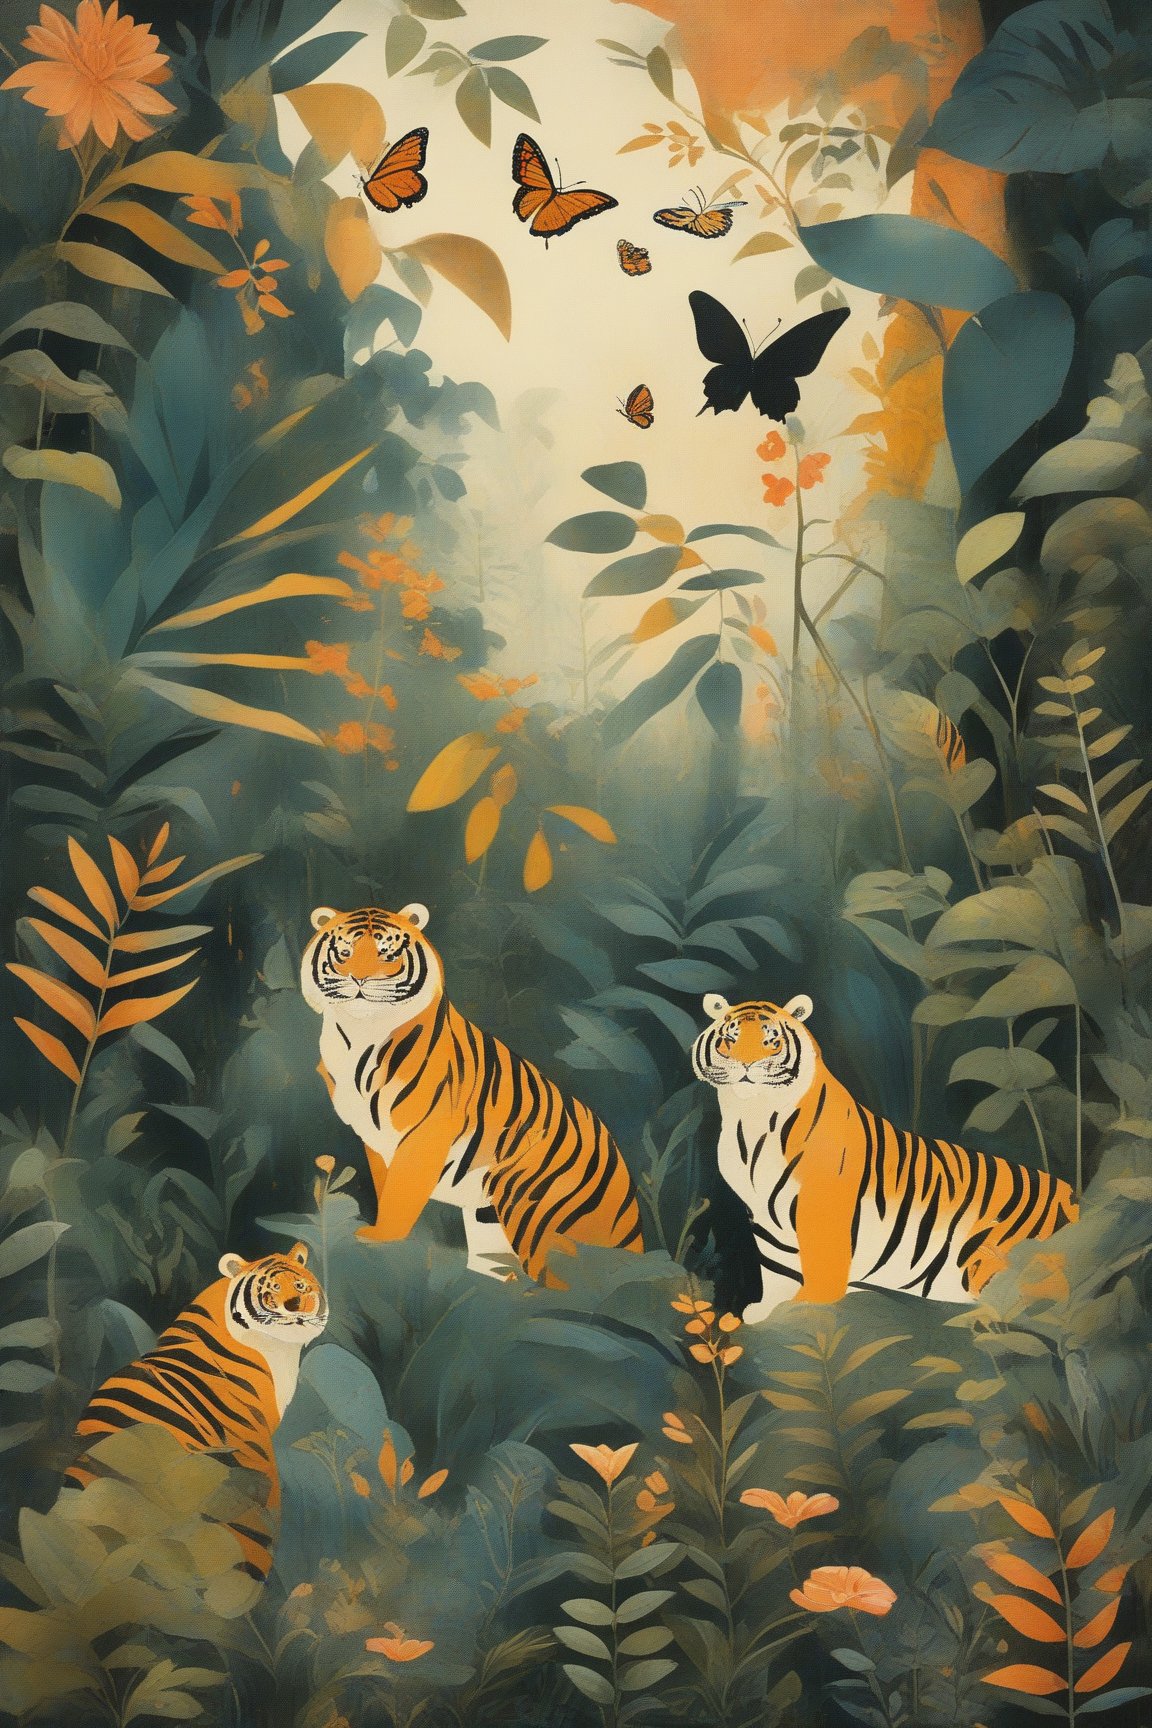 A vibrant and colorful jungle scene. Dominating the scene are three tigers, each with distinct patterns and colors. One tiger is orange with black spots, another is a mix of orange and white, and the third is a pale orange with black stripes. Surrounding the tigers are various tropical plants, trees, and flora. There are also small creatures like a sloth hanging from a tree and a butterfly fluttering around. The overall ambiance of the image is playful and whimsical, with a harmonious blend of nature and animals